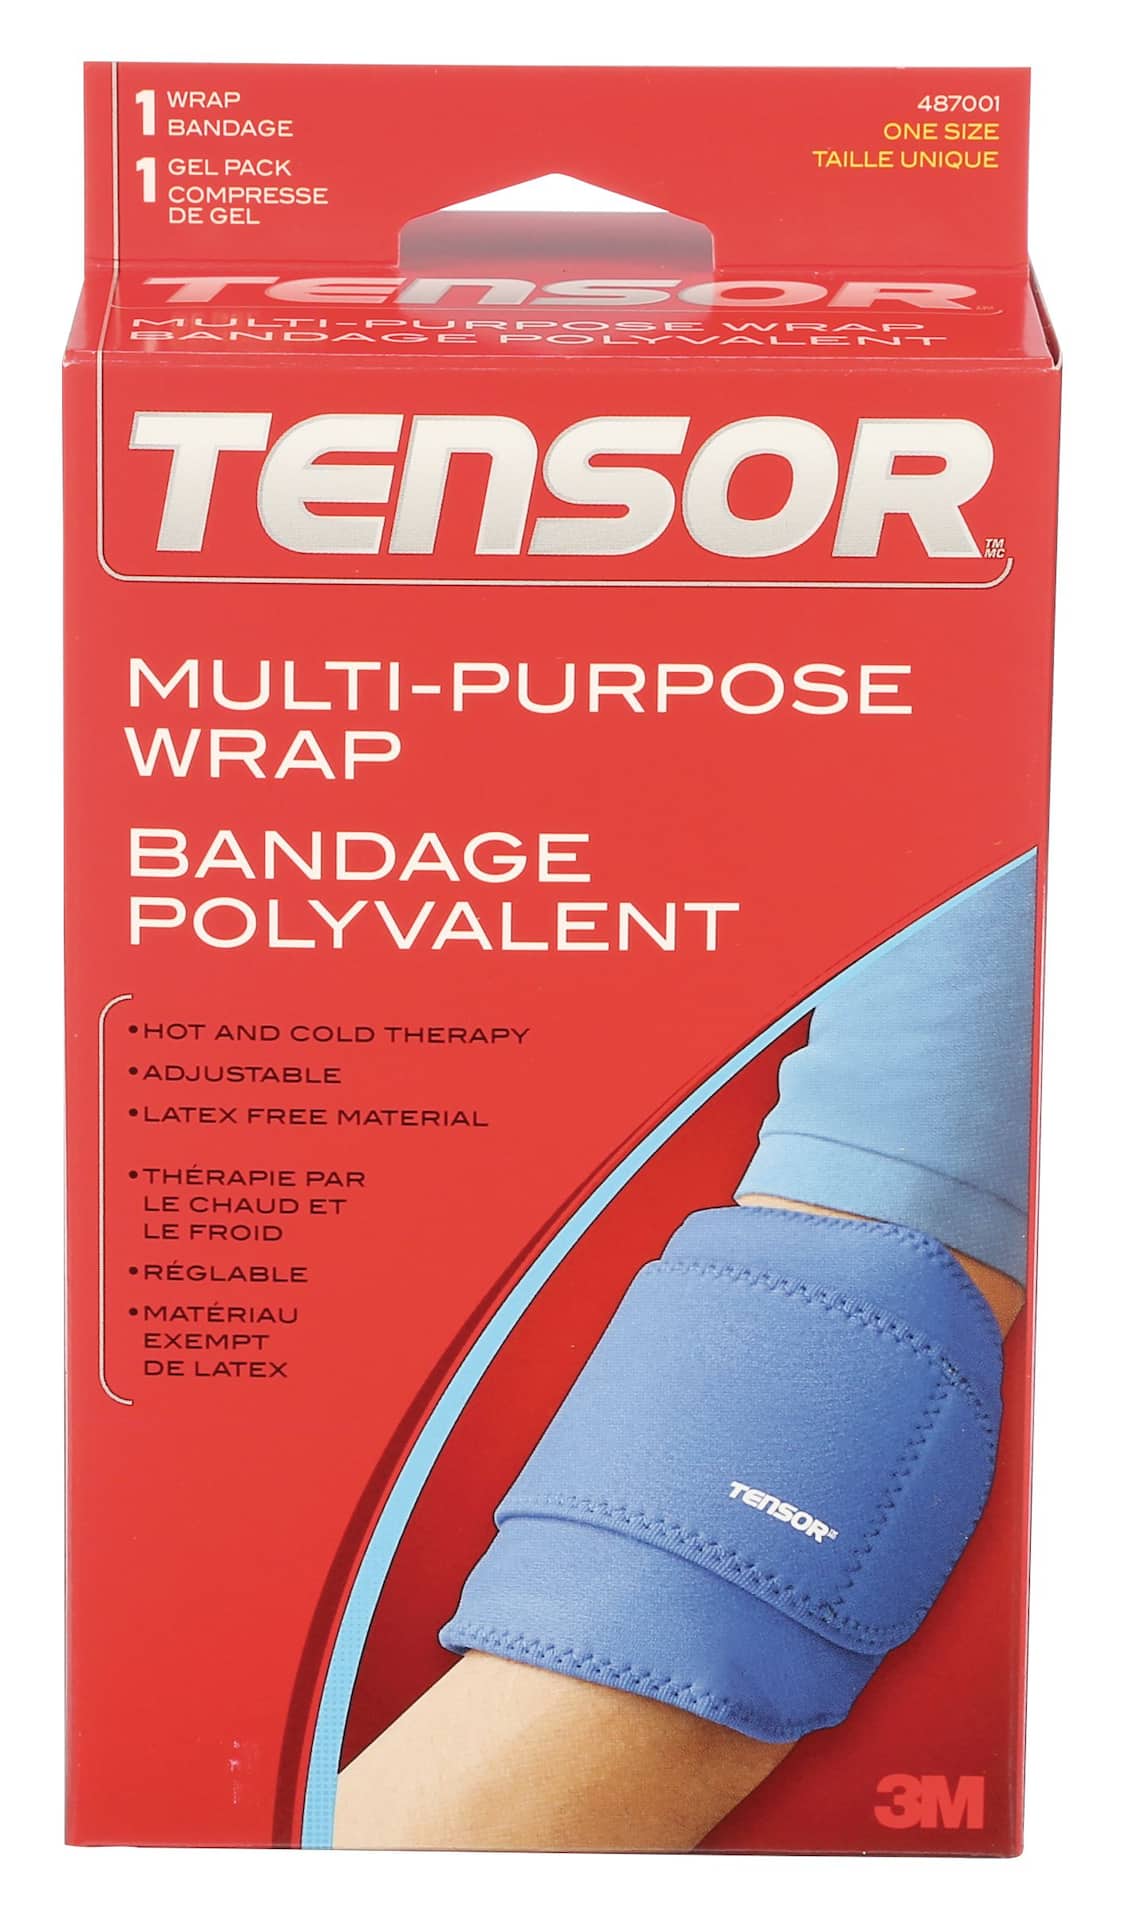 Tensor Multi-Purpose Hot/Cold Therapy Wrap with Gel Pack, One Size